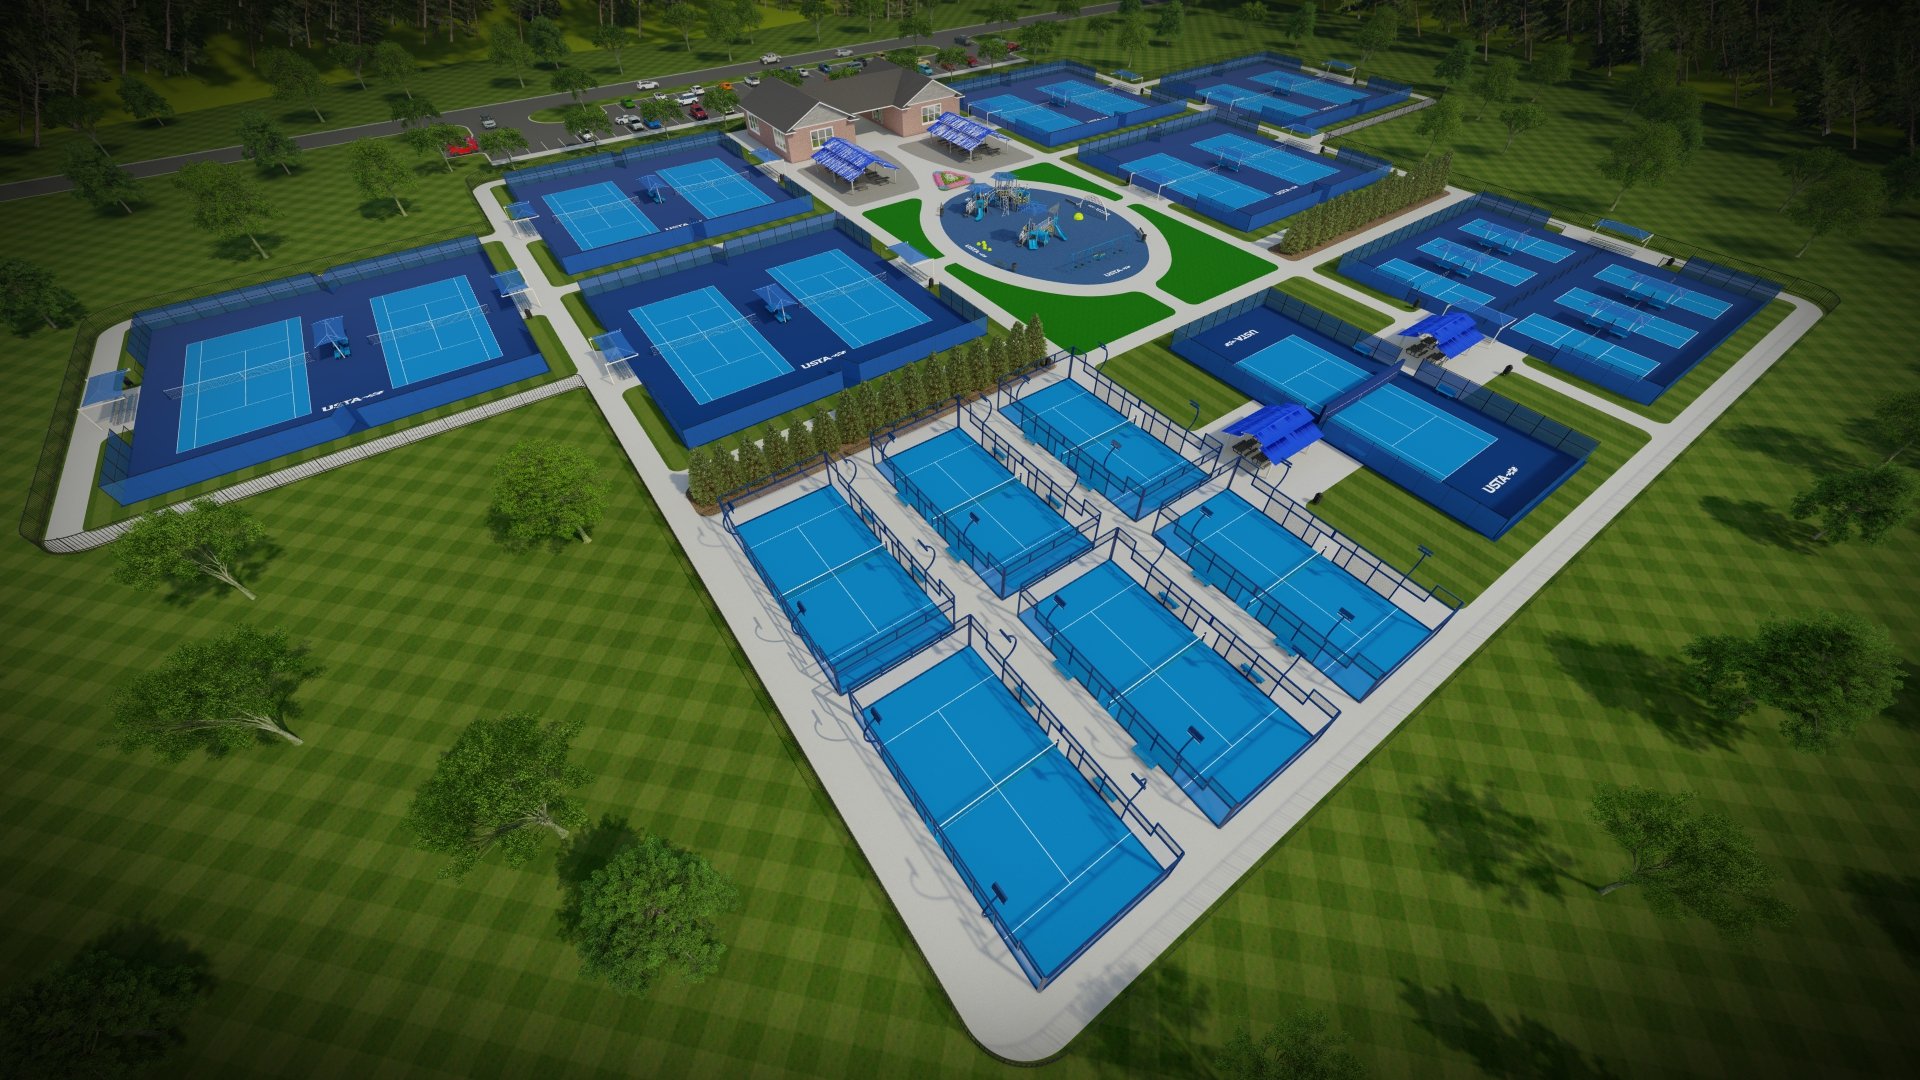 USTA Tennis Facility in partnership with IMPACT Parks